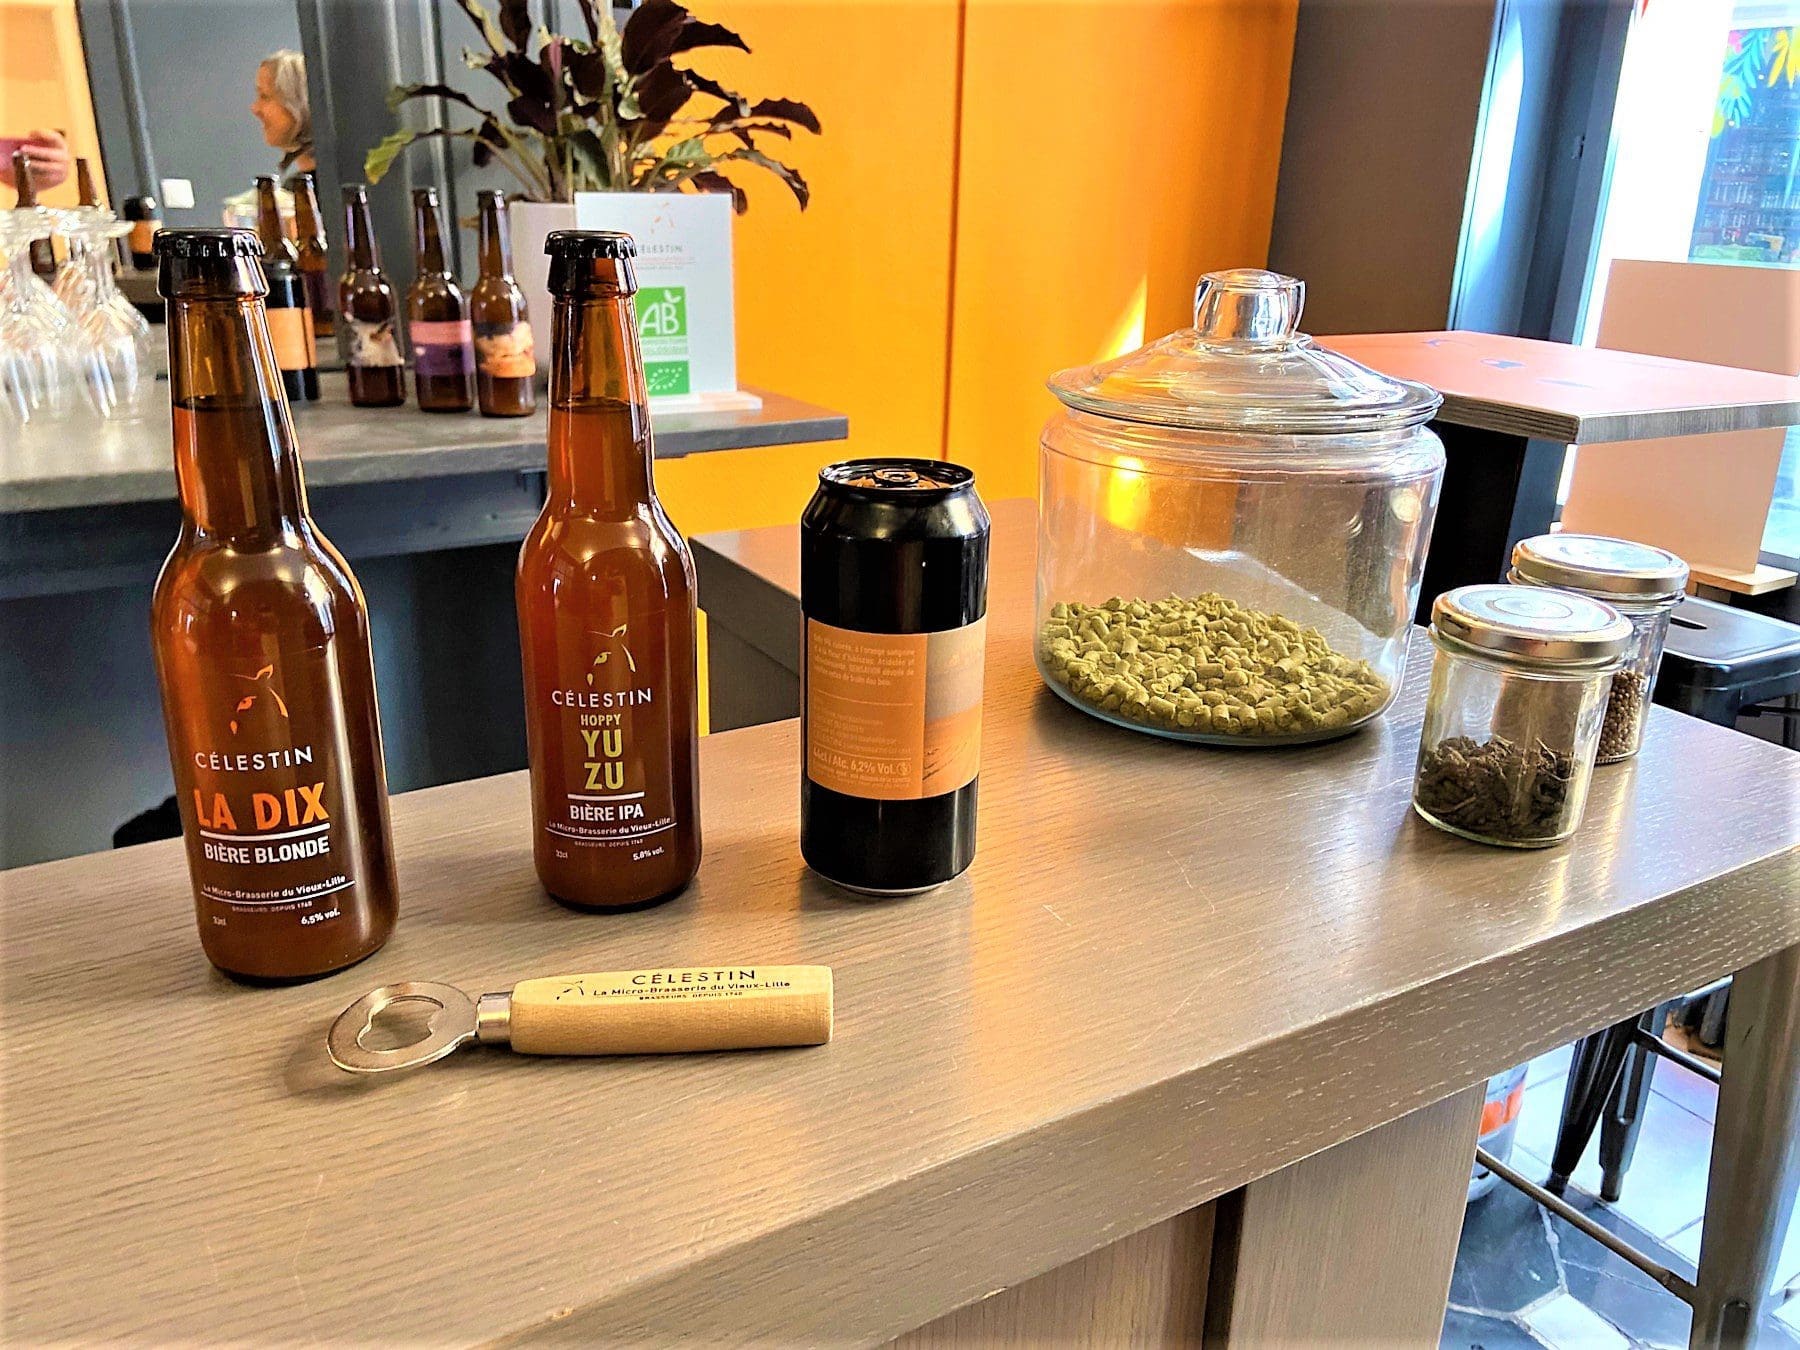 Key ingredients to Lille beer at Celestin brewery